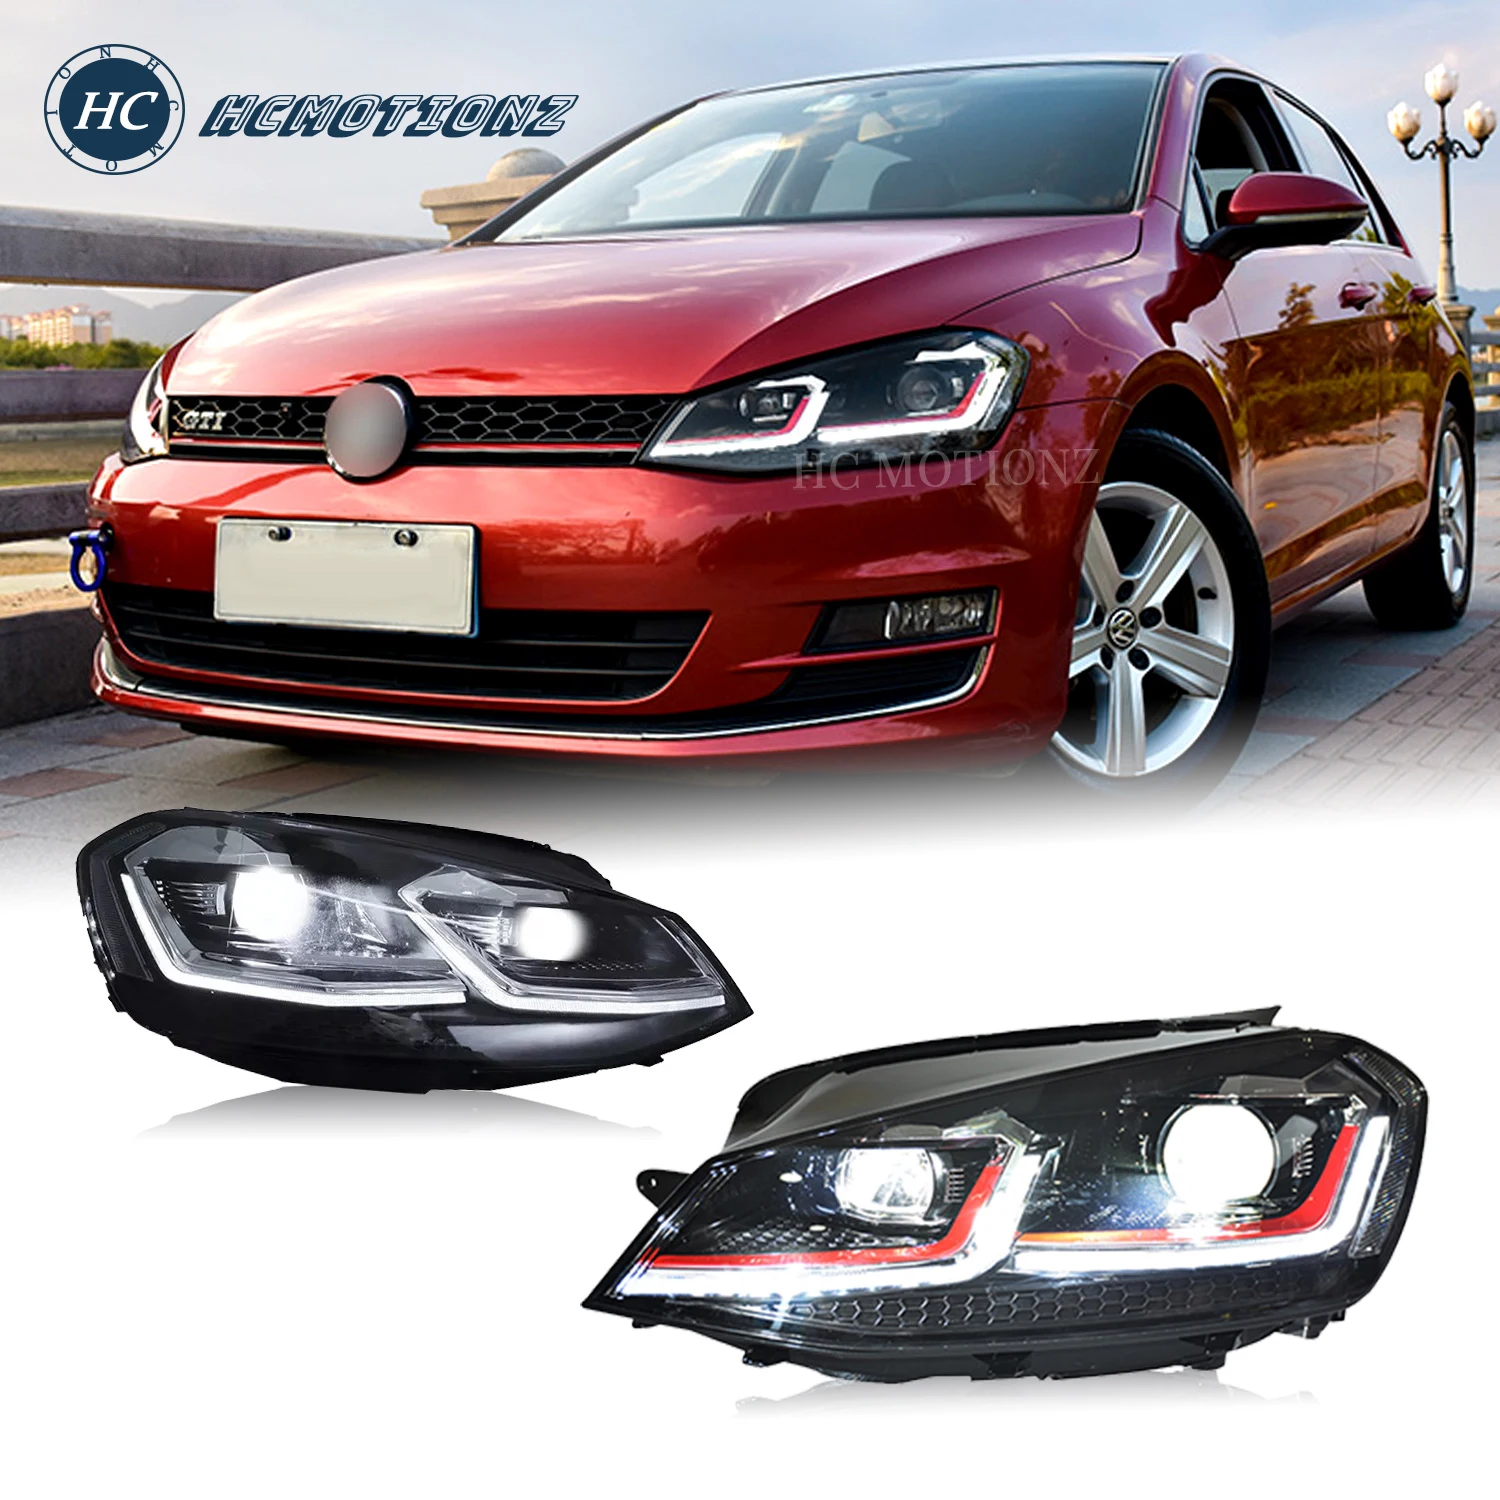 HCmotion Auto Headlights for  2013-2018 VW MK7 Golf Projector Headlights with White Line Red Line DRL Auto Head Lamp Assembly